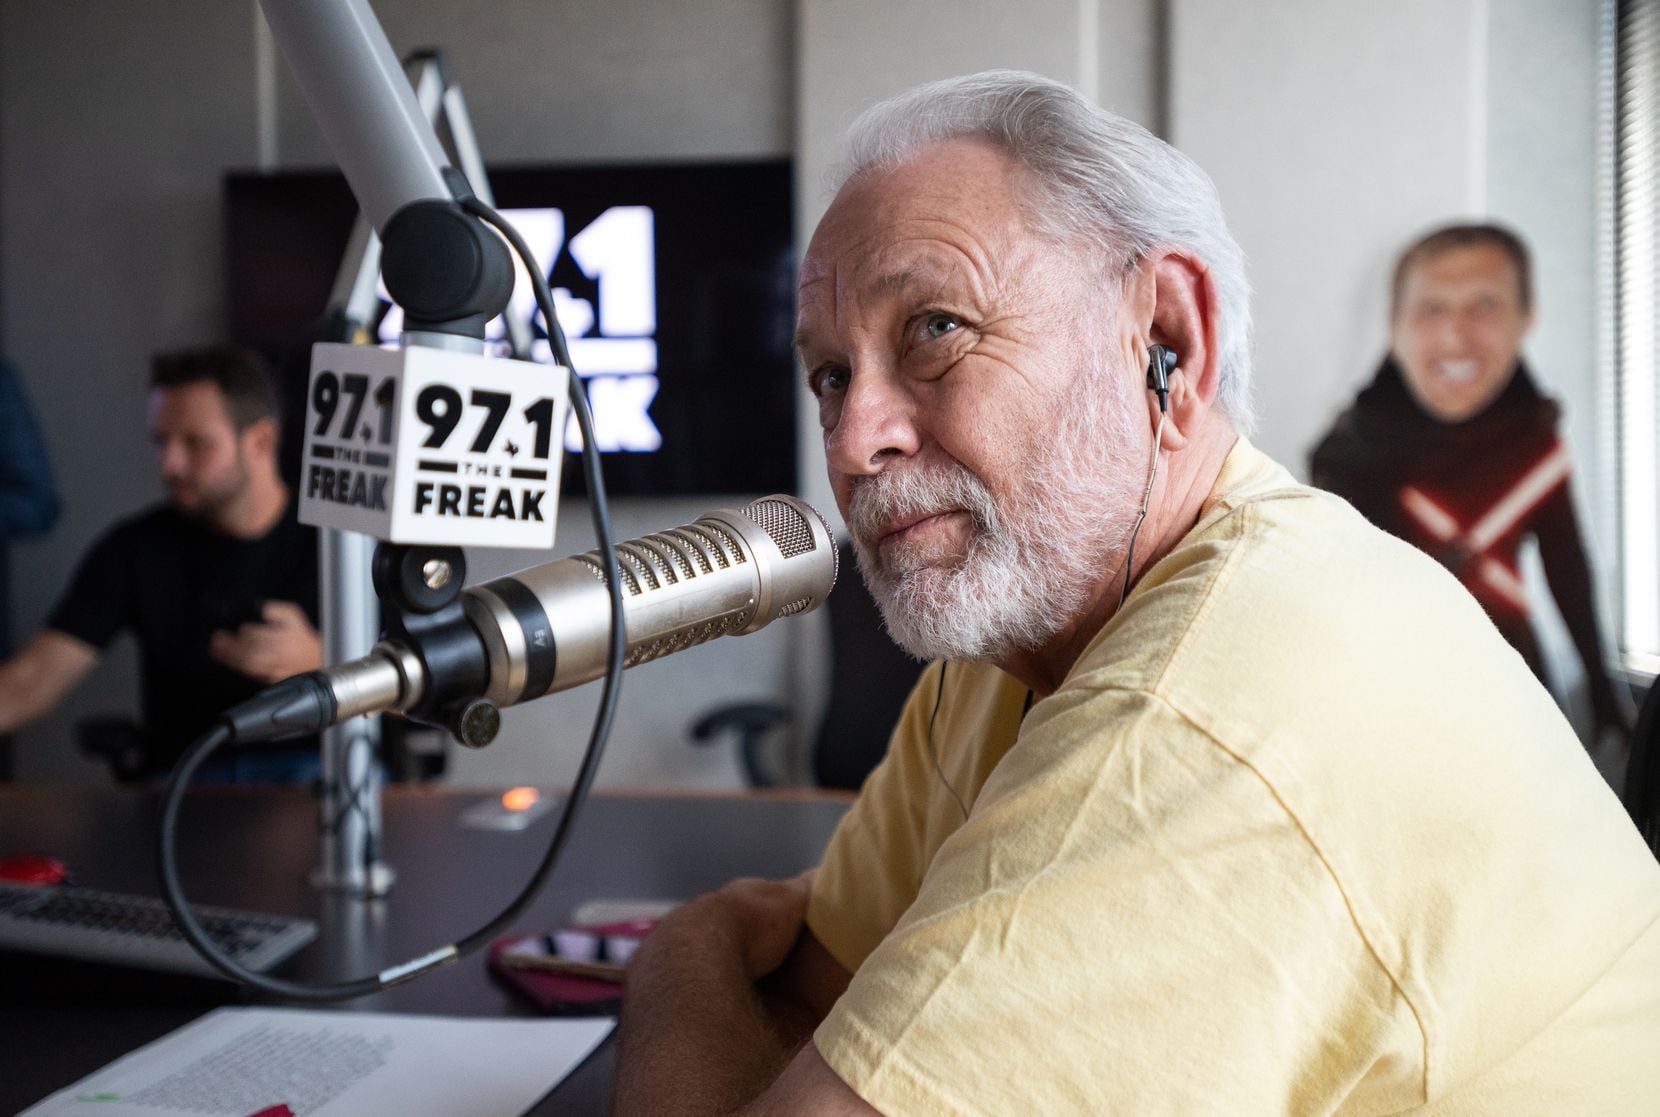 Radio legend Mike Rhyner brought in former colleague Danny Balis to his afternoon show, The...